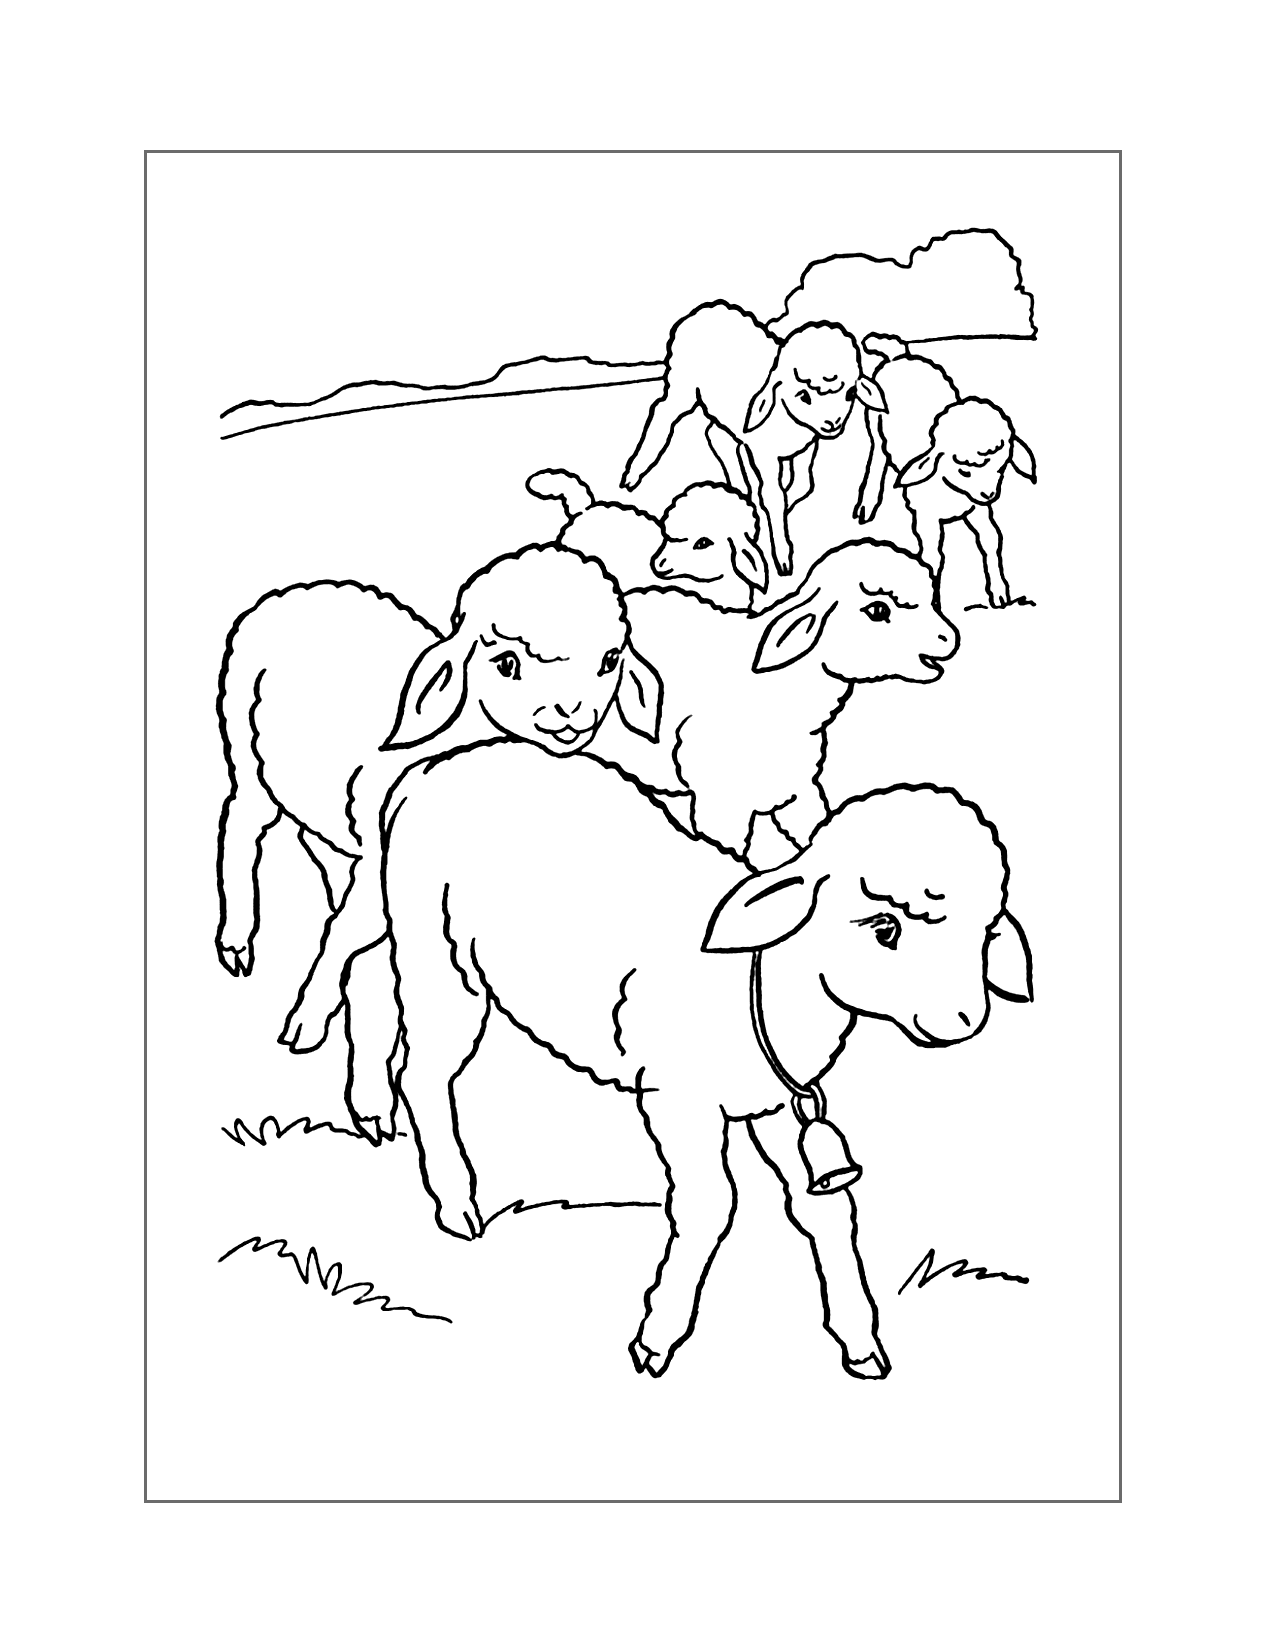 Flock Of Lamb Coloring Page